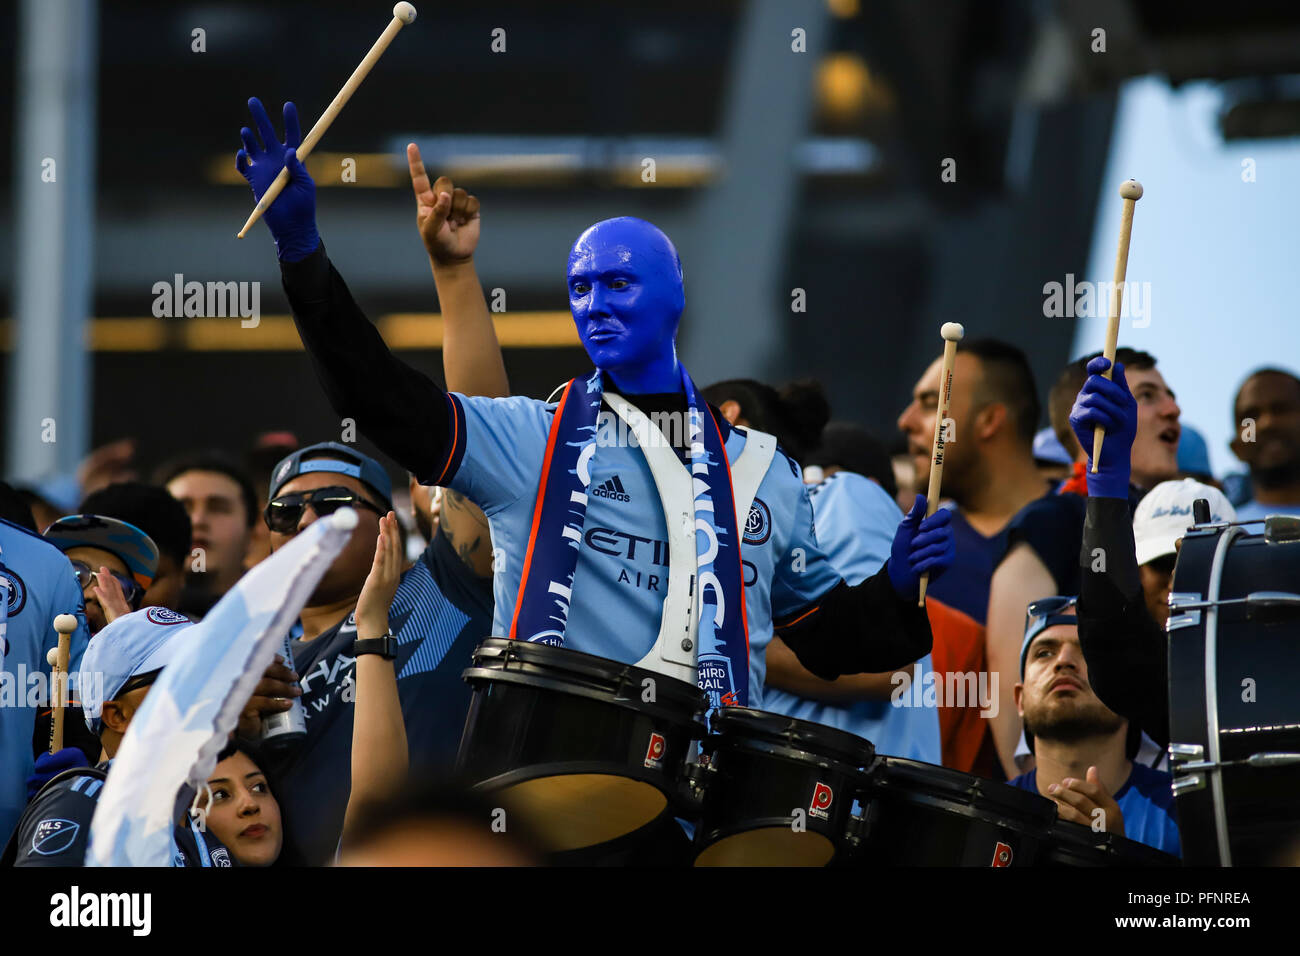 Bronx, NY, USA. 22nd August, 2018. The Blue Man Group joins the Third Rail and NYCFC fans at the NYCFC vs New York Redbulls derby. © Ben Nichols/Alamy Live News. Stock Photo